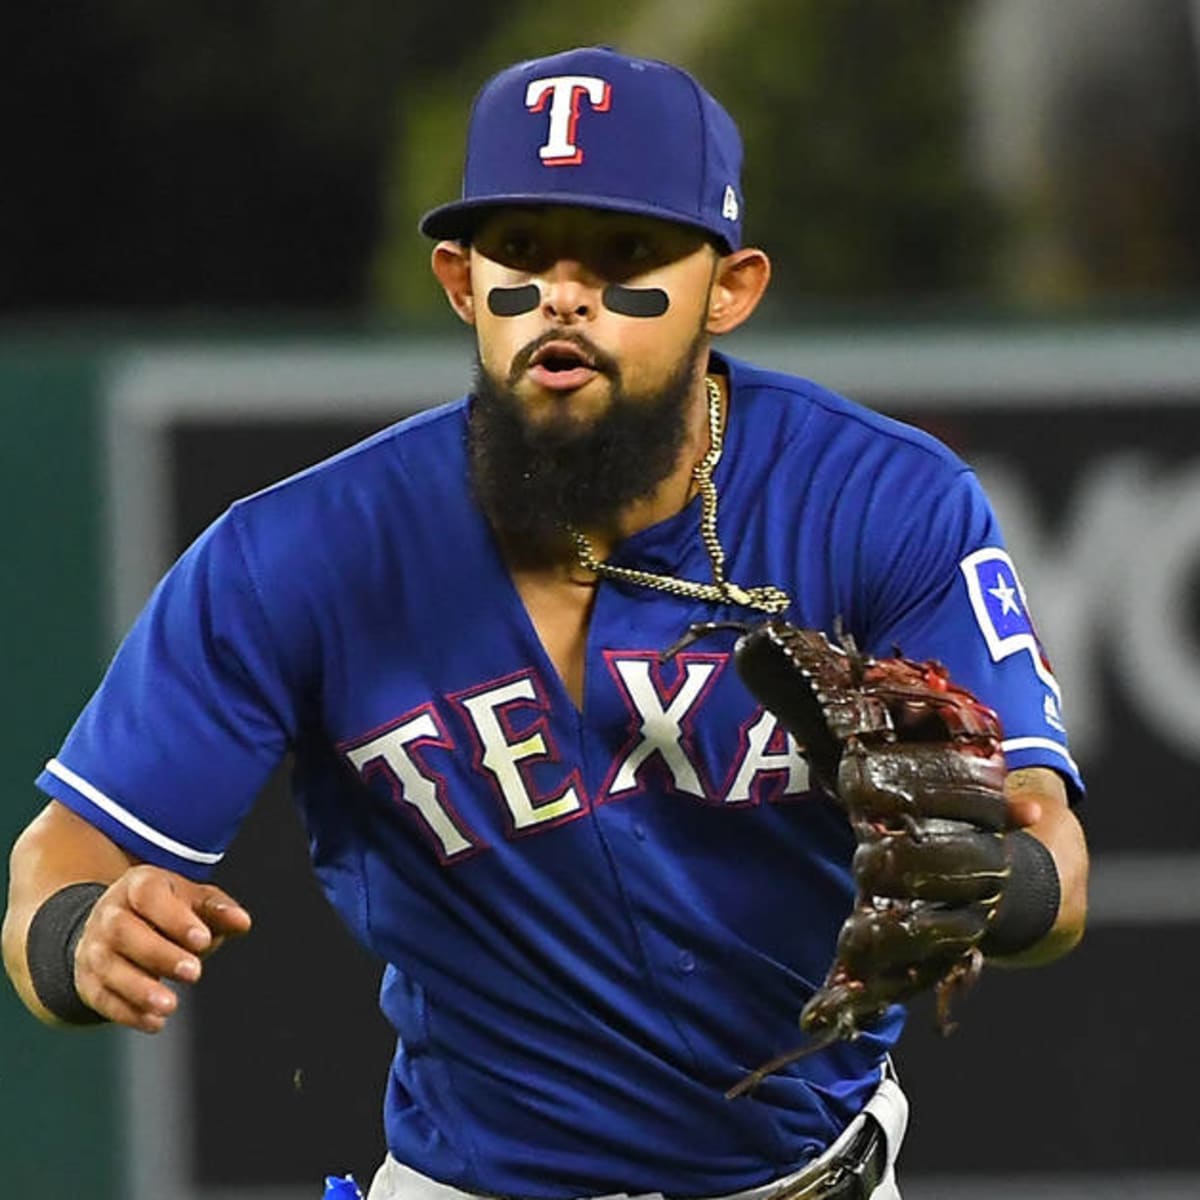 Rougned Odor's Baseball 'Shorts' Look Completely Outrageous